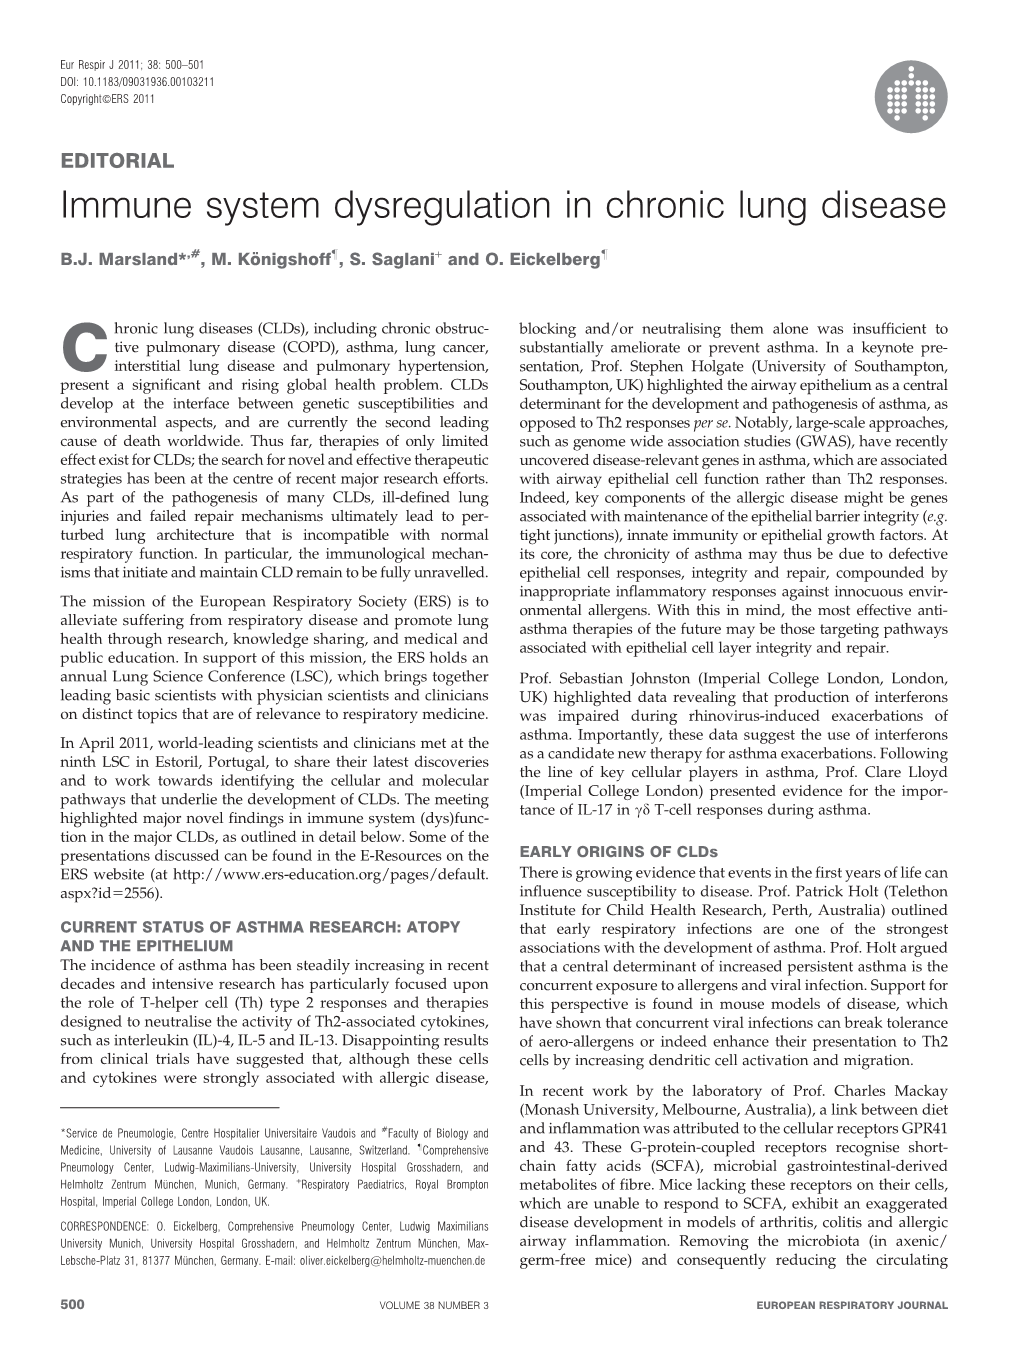 Immune System Dysregulation in Chronic Lung Disease